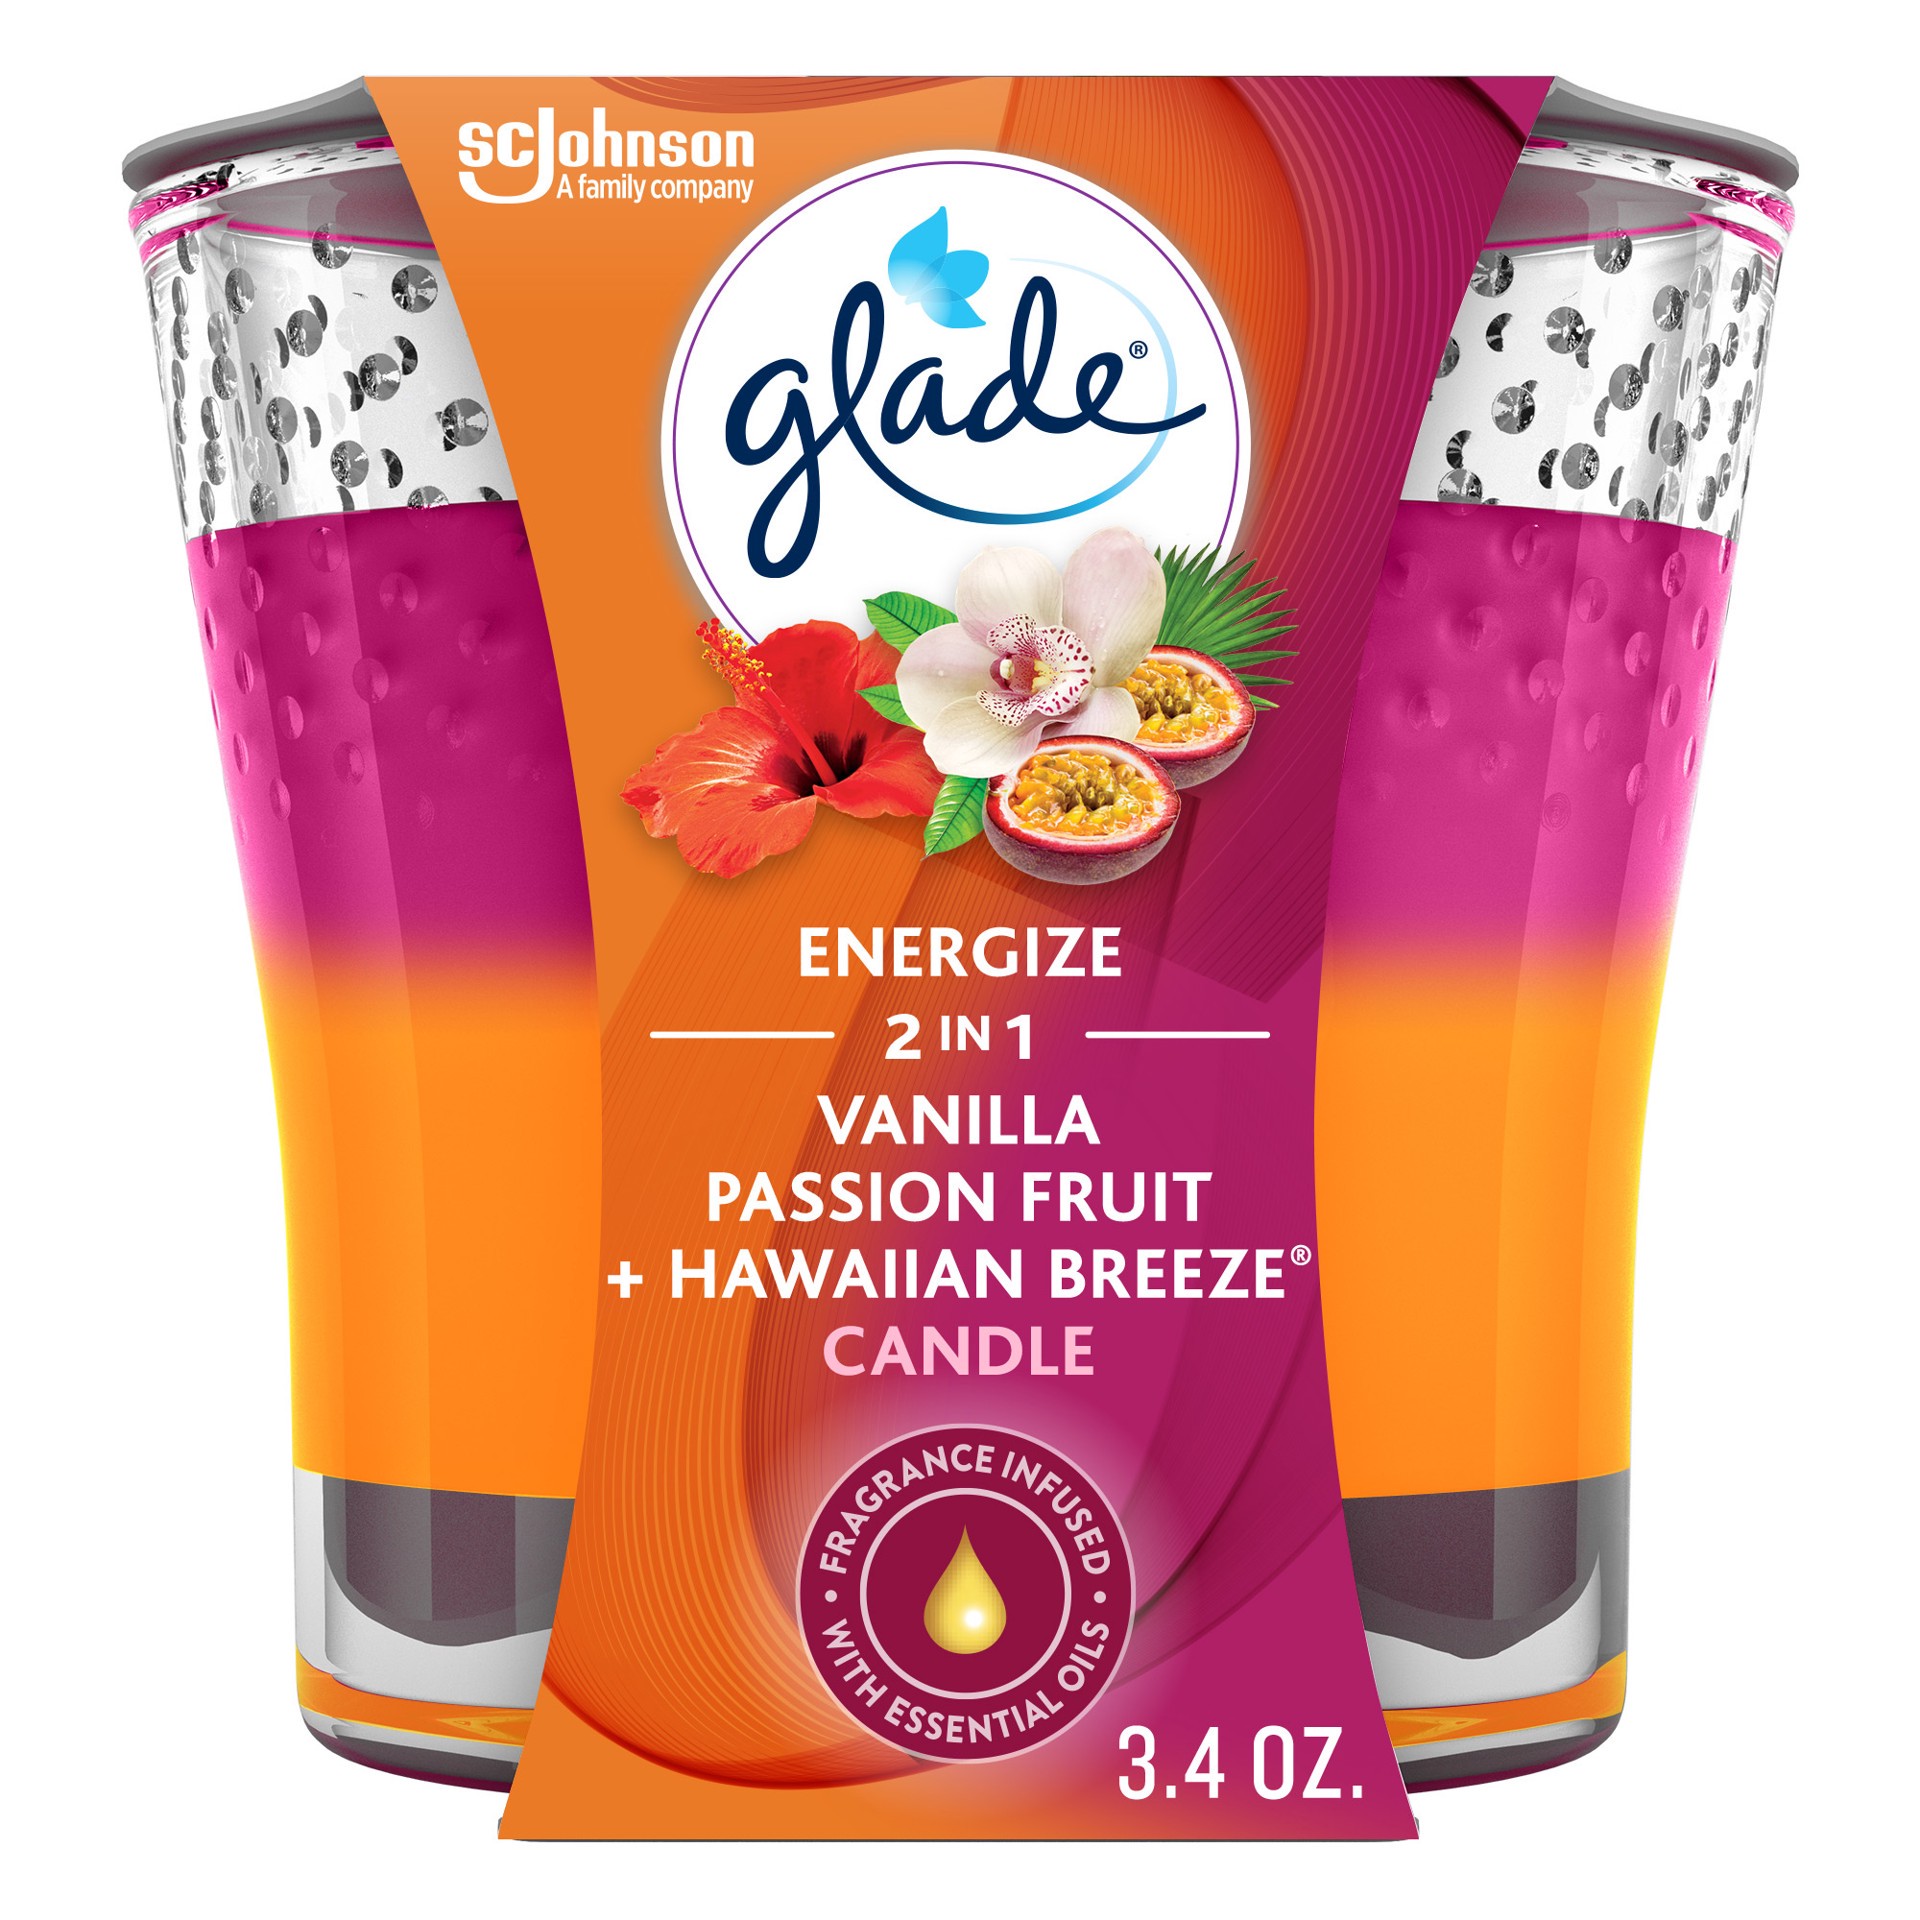 slide 5 of 5, Glade Scented Candle Jar, Vanilla Passion Fruit & Hawaiian Breeze 2-in-1, Fragrance Infused with Essential Oils, 3.4 oz, 3.4 oz